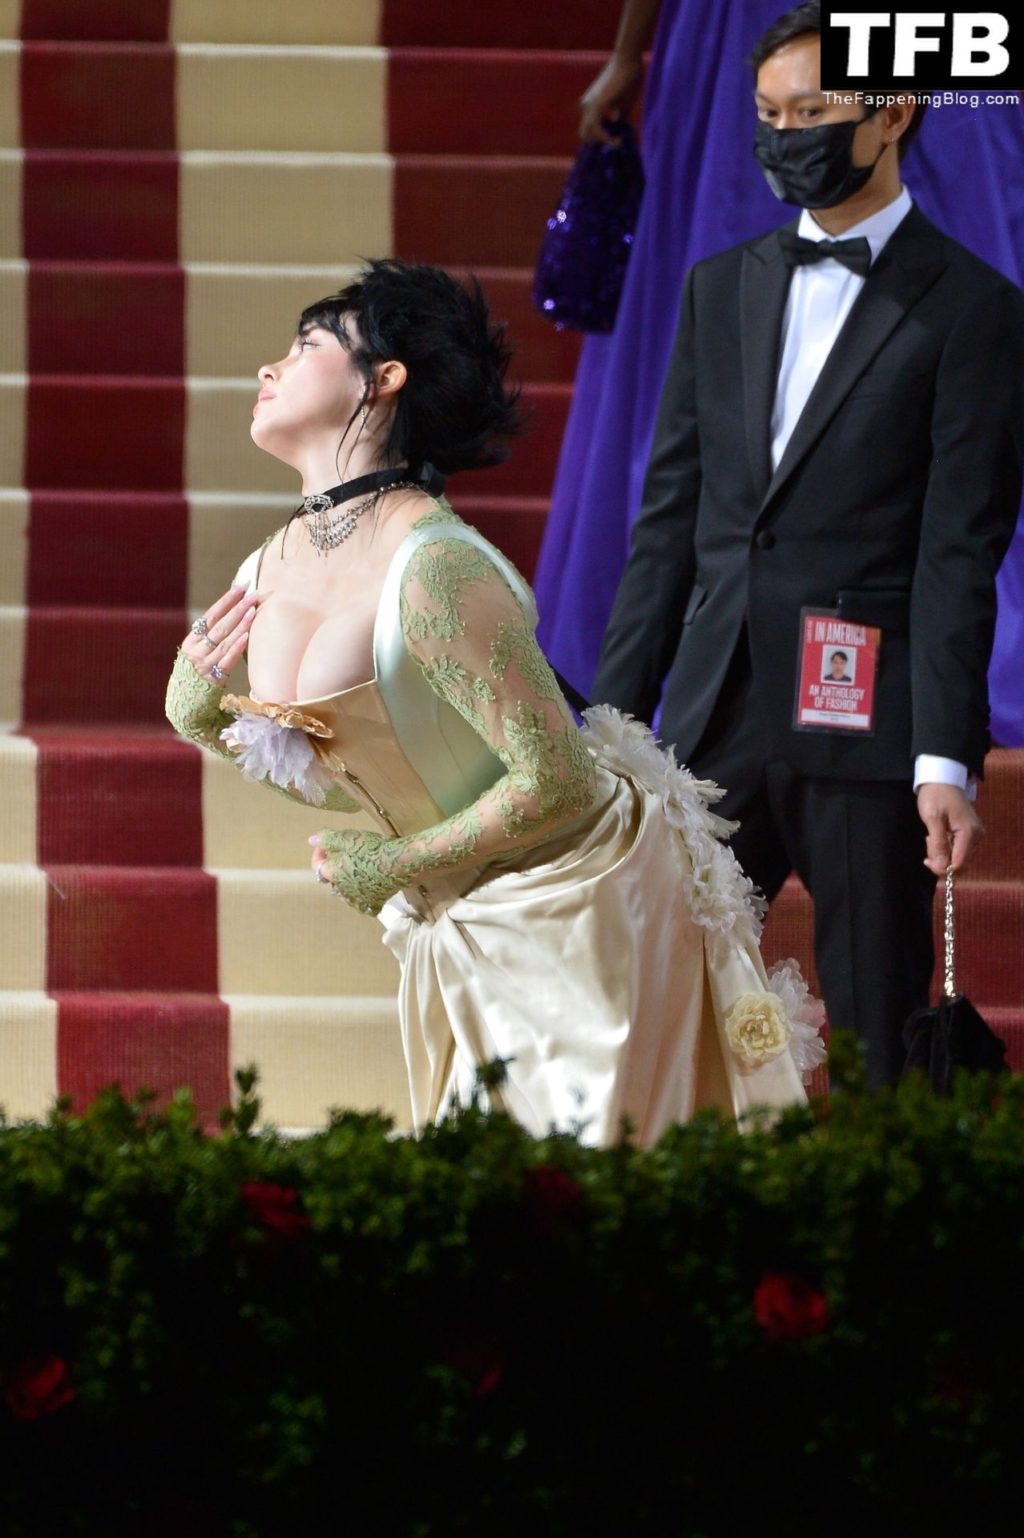 Billie Eilish Sexy The Fappening Blog 87 1024x1538 - Billie Eilish Showcases Nice Cleavage at The 2022 Met Gala in NYC (155 Photos)